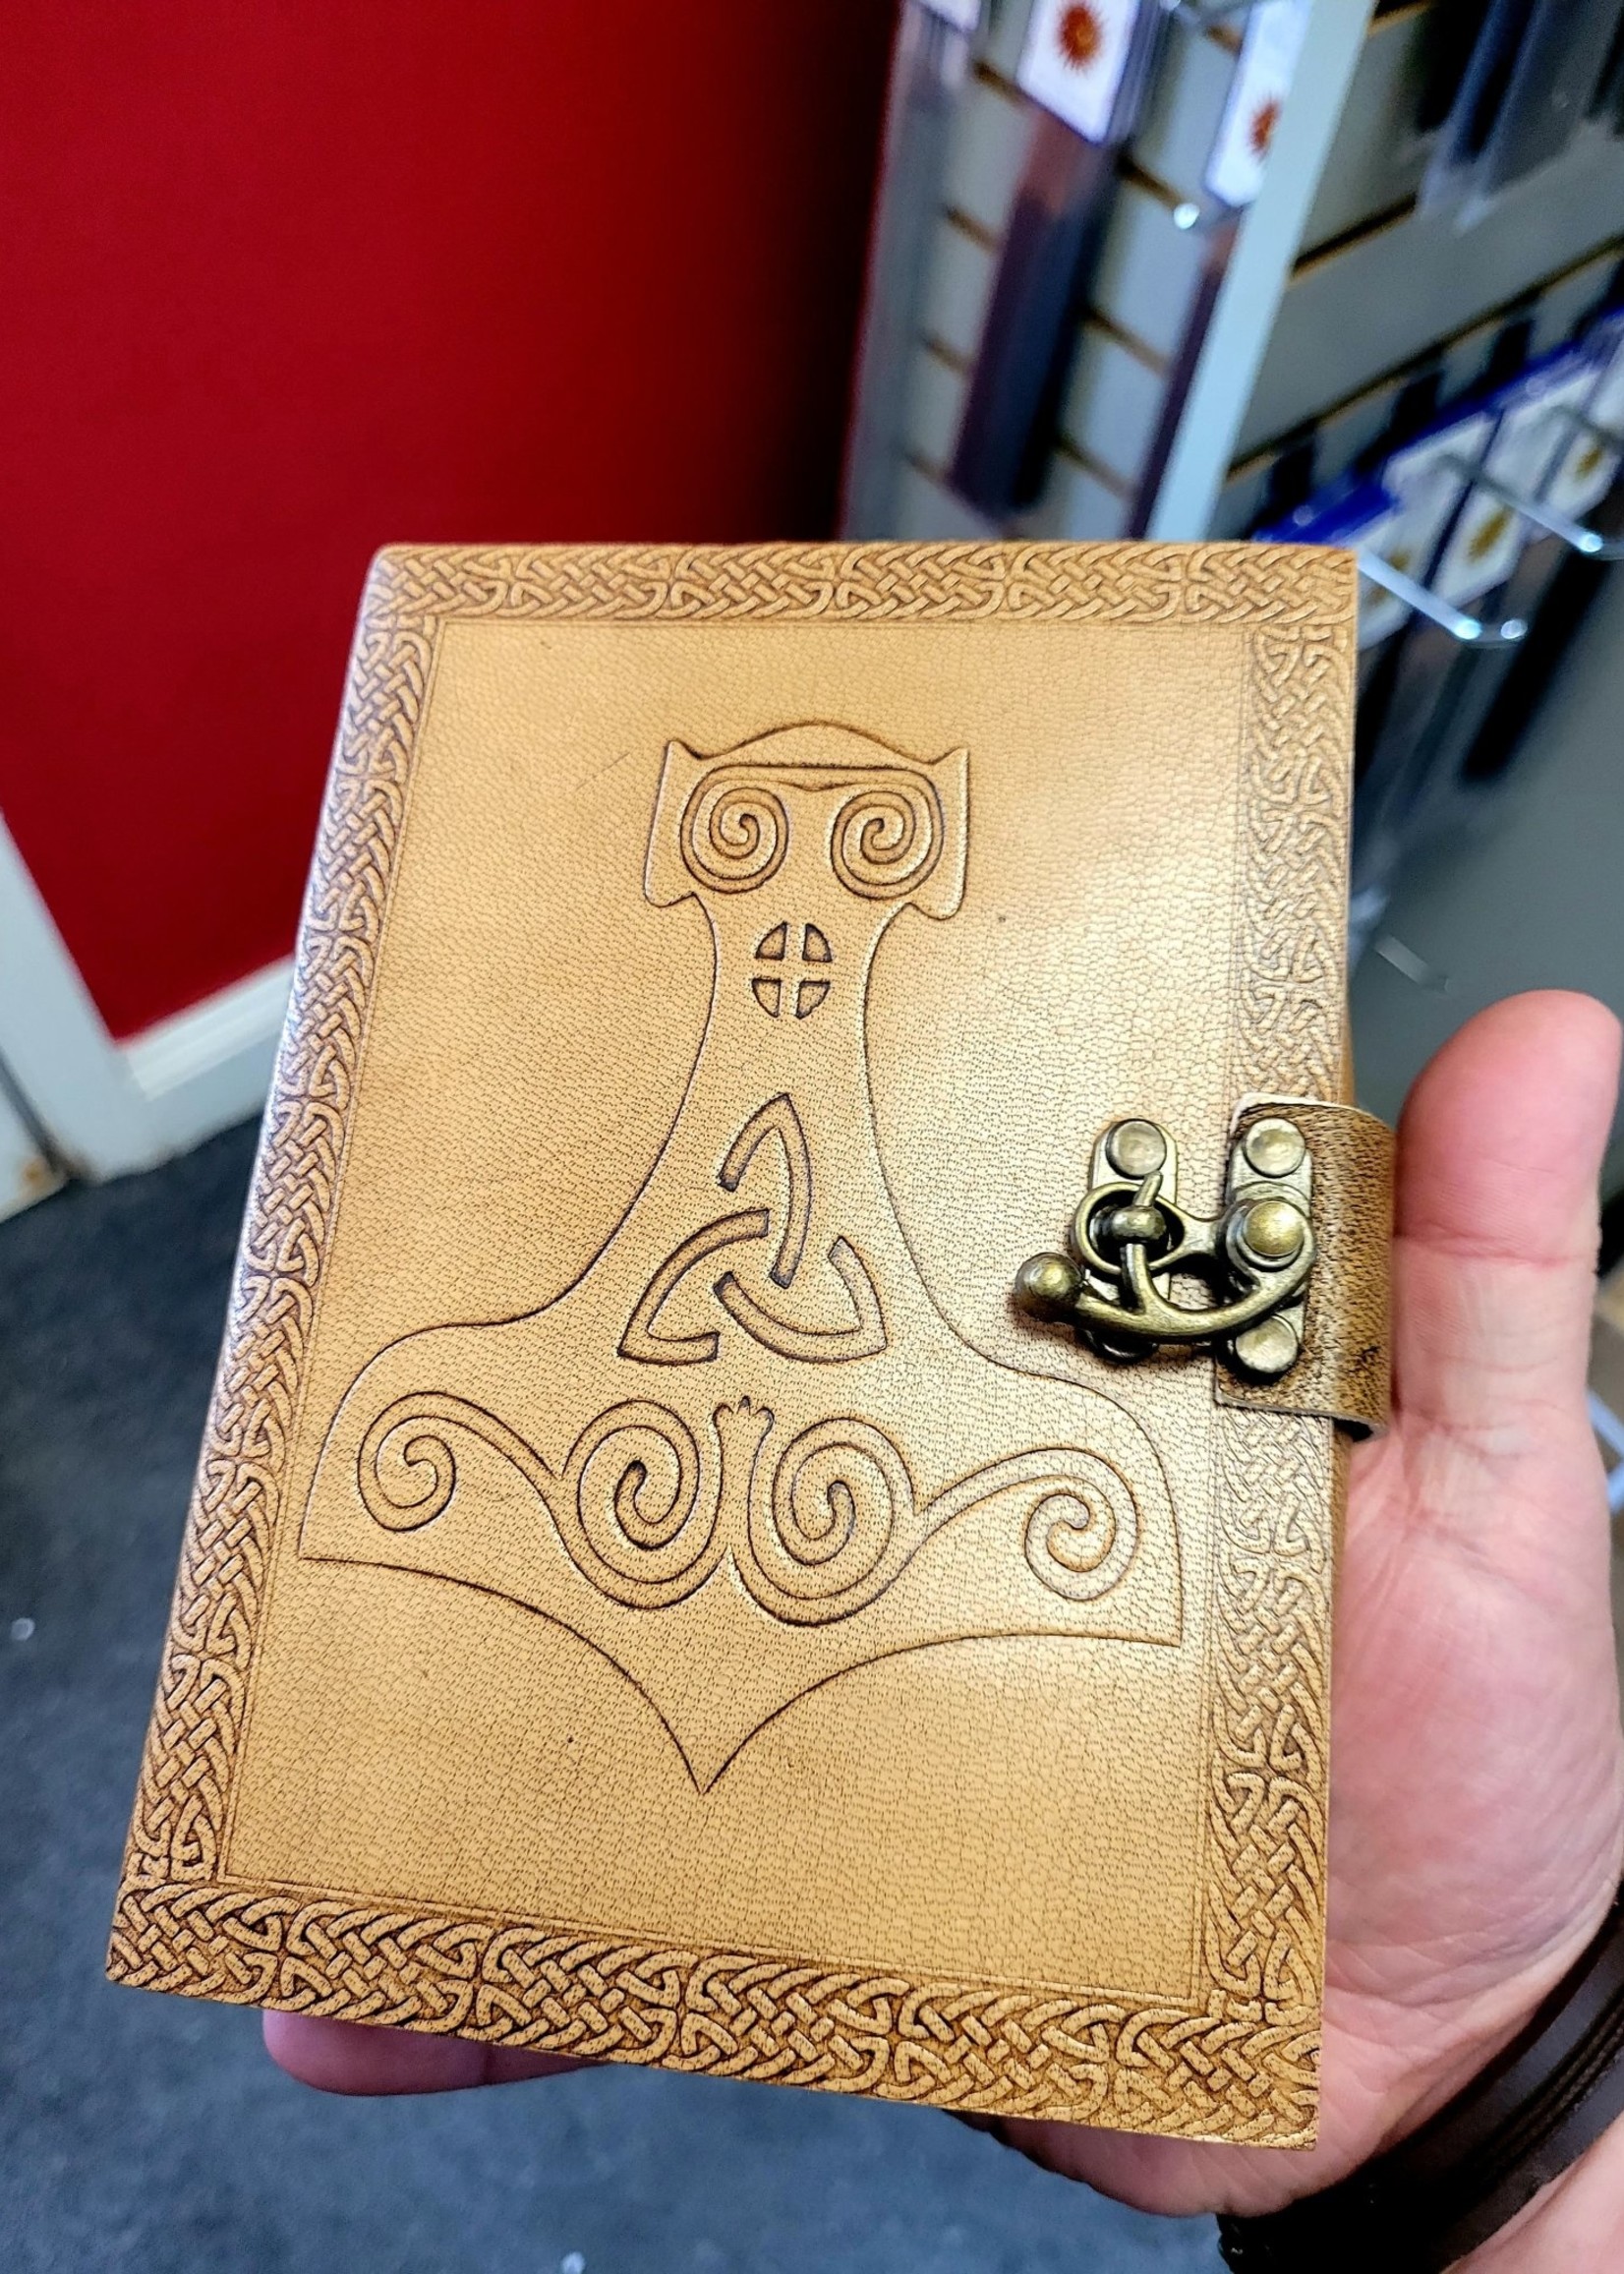 Hand Crafted Leather Journals Made in Nepal